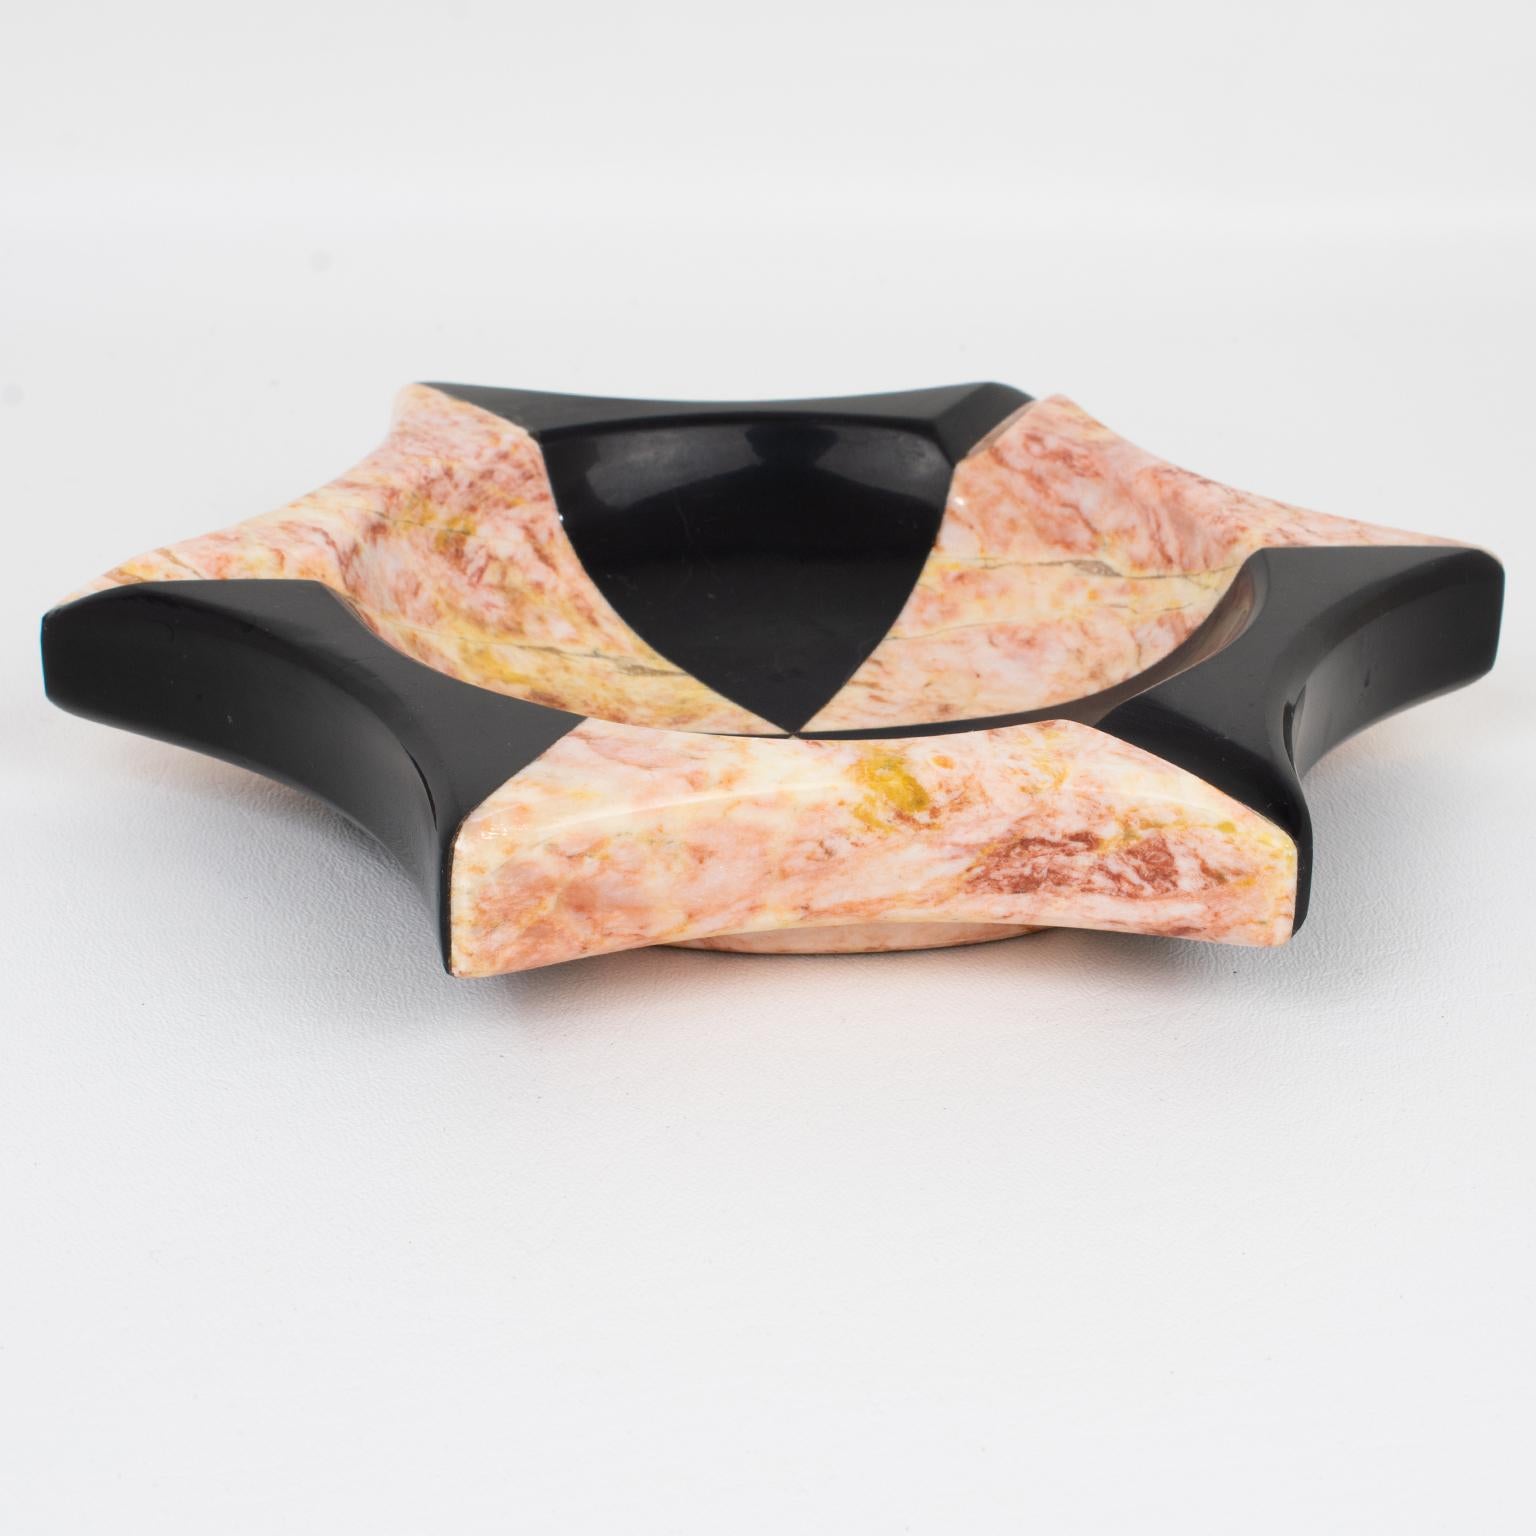 Mid-Century Modern Black and Pink Onyx Marble Cigar Ashtray, Vide Poche, Catchall, Vessel, Bowl